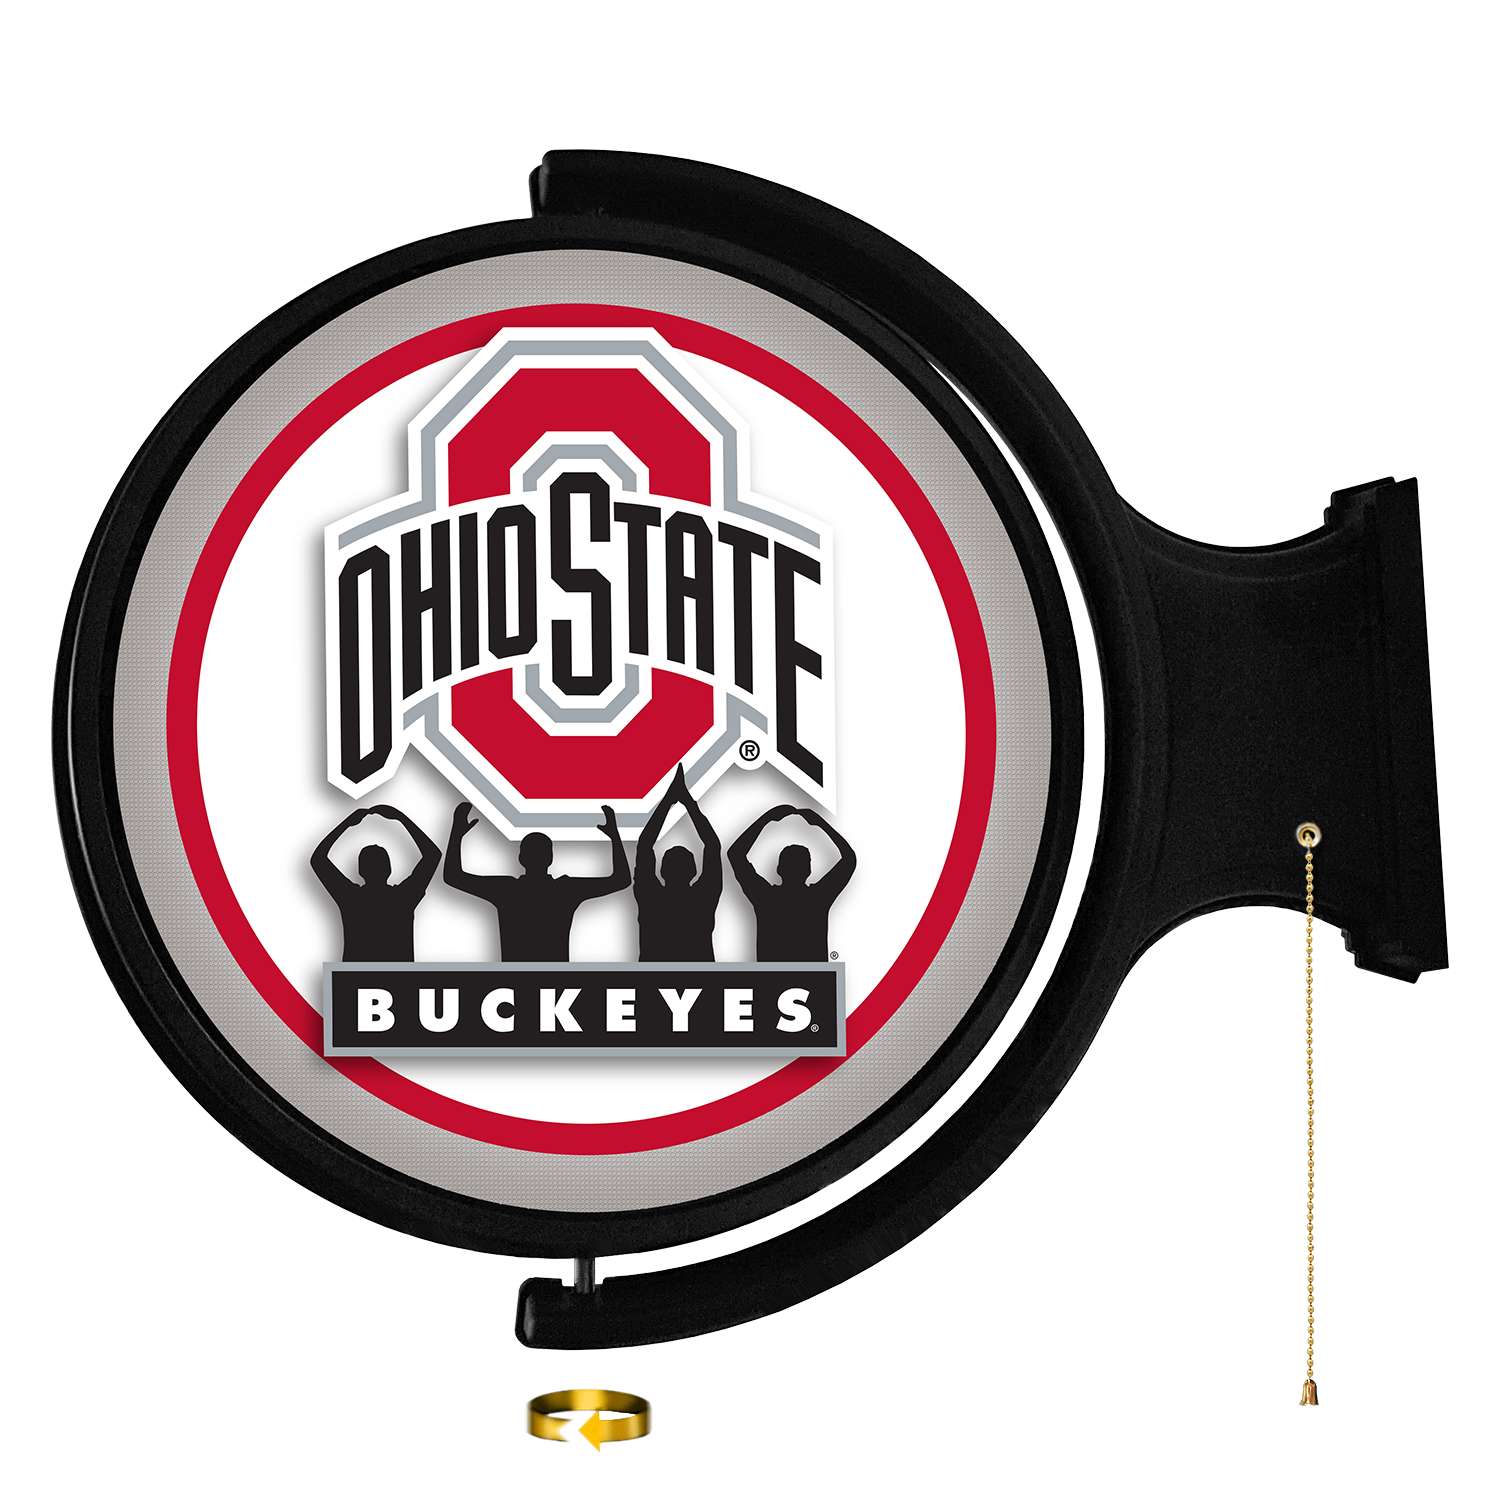 Ohio State Buckeyes: O-H-I-O - Original Round Rotating Lighted Wall Sign Default Title